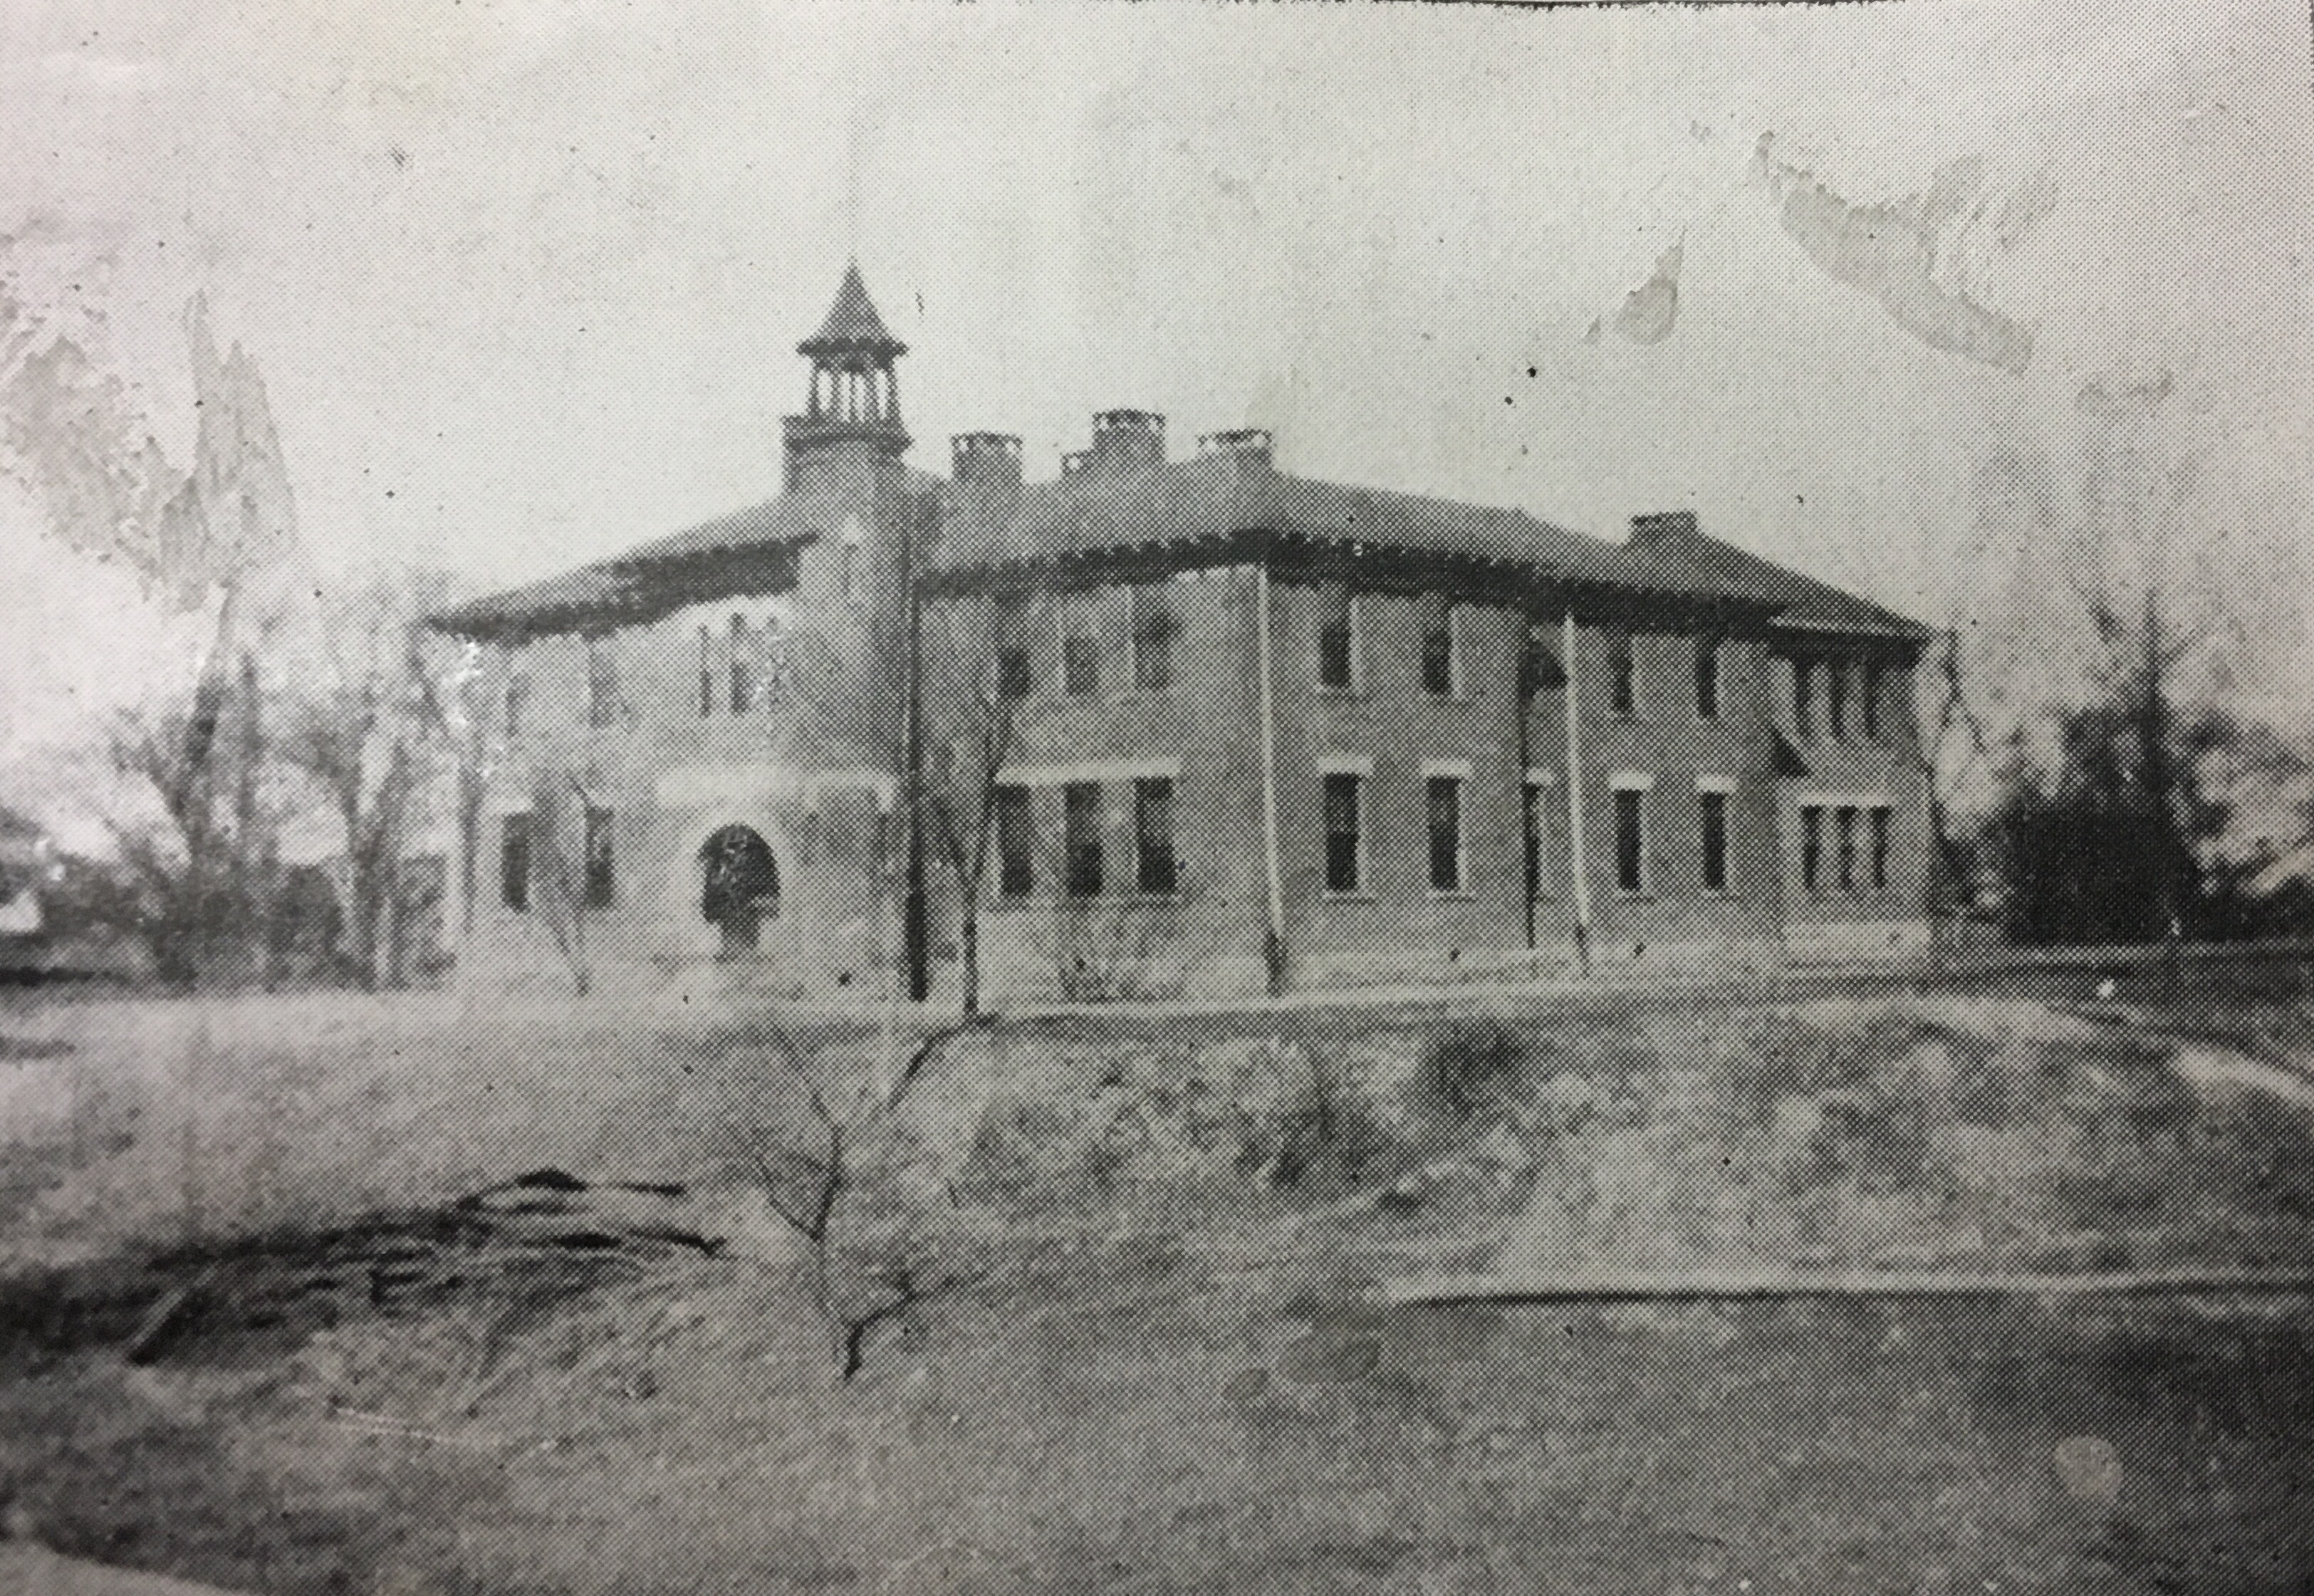 For the first almost thirty years of its existence, C-K High was located in the back rooms of the Ceredo Grade School on Main Street in Ceredo. The building burned down in 1957. Courtesy of the Ceredo Historical Society Museum